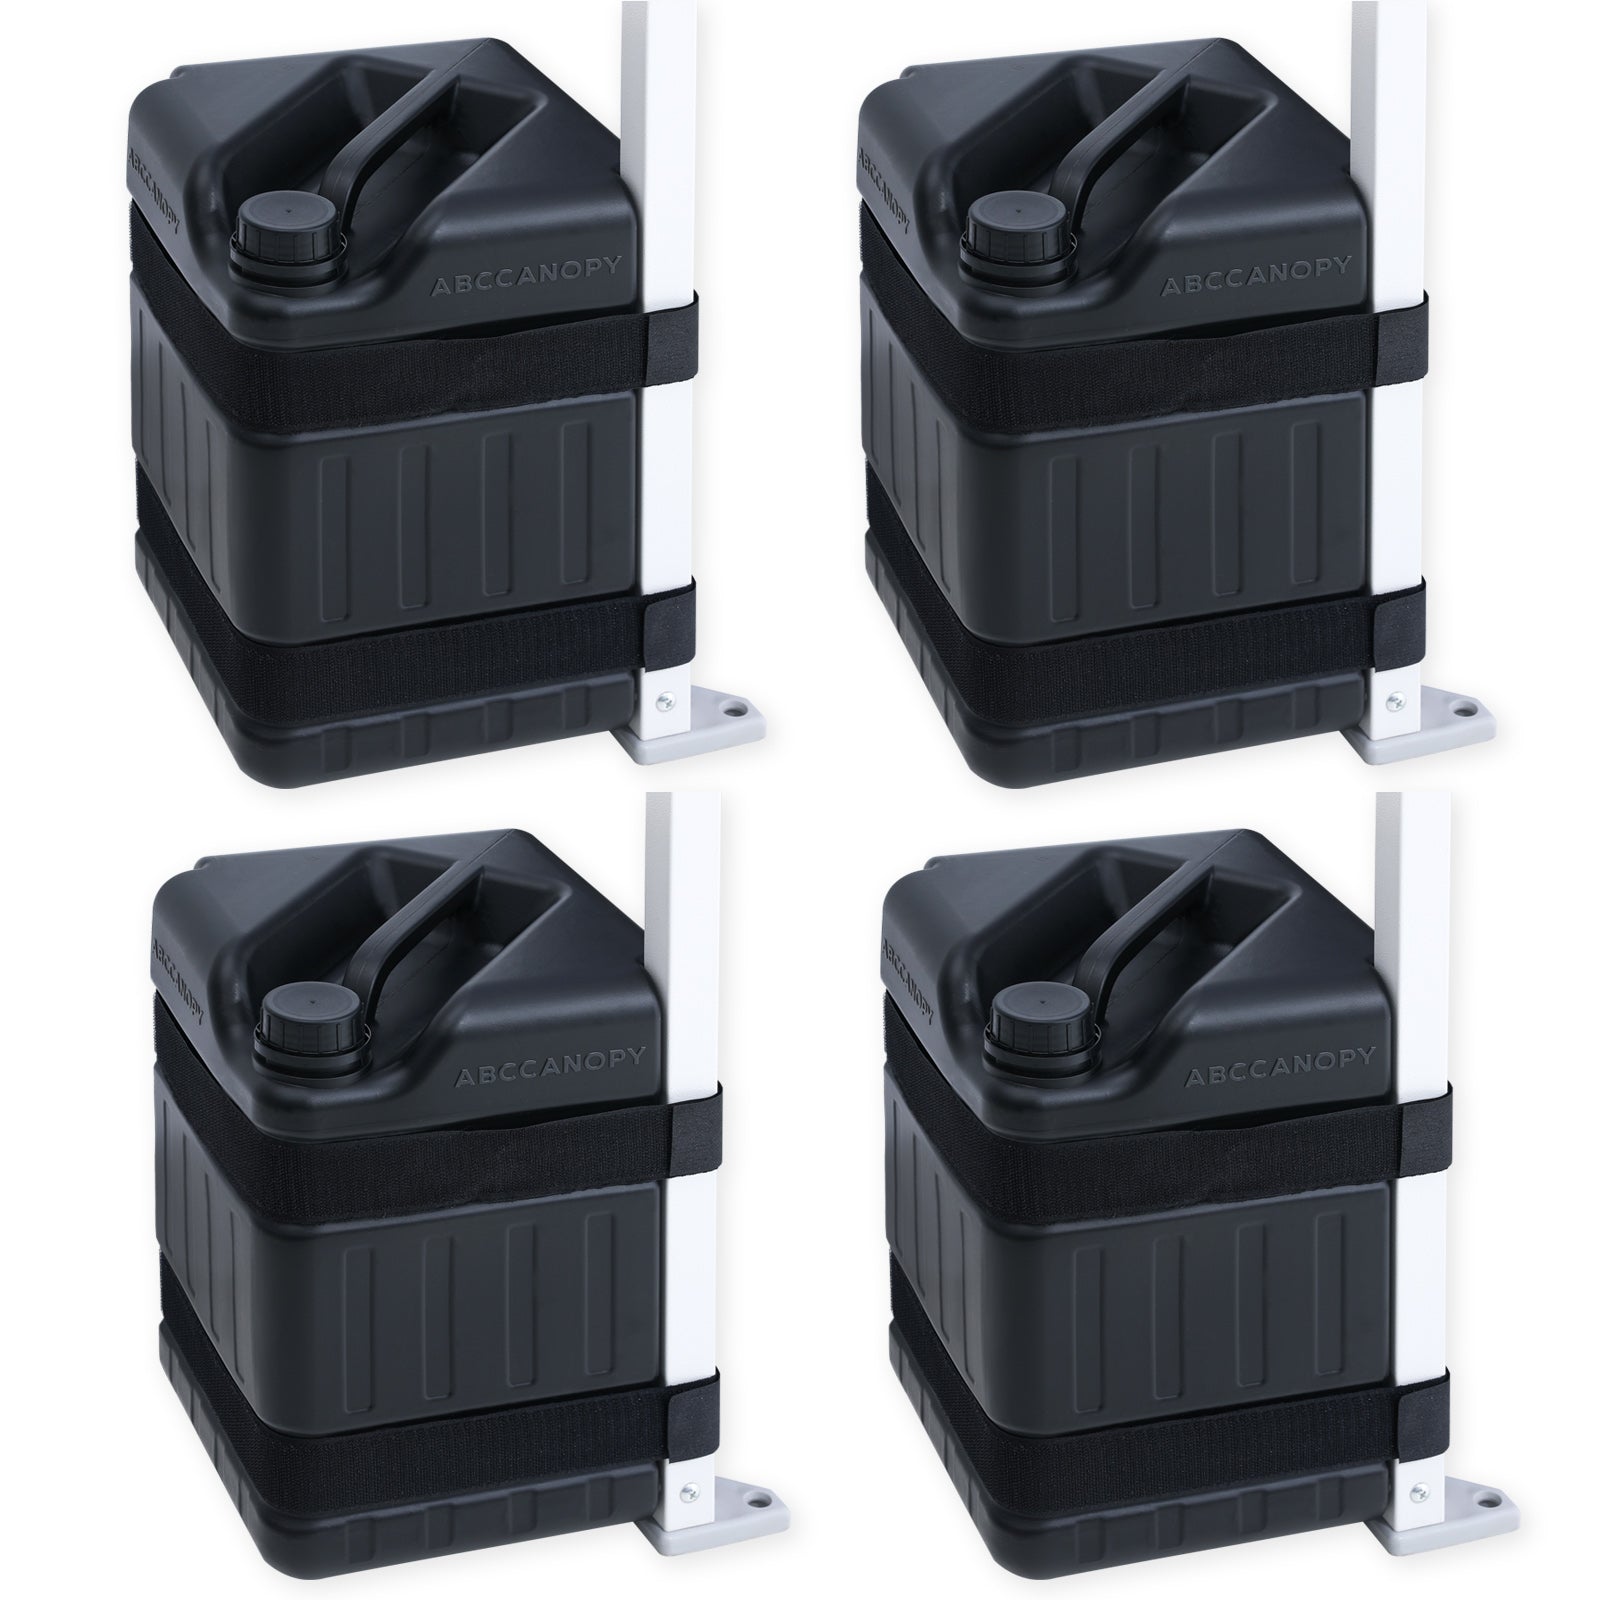 ABCCANOPY Heavy Duty Water Canopy Weights, 4Pack